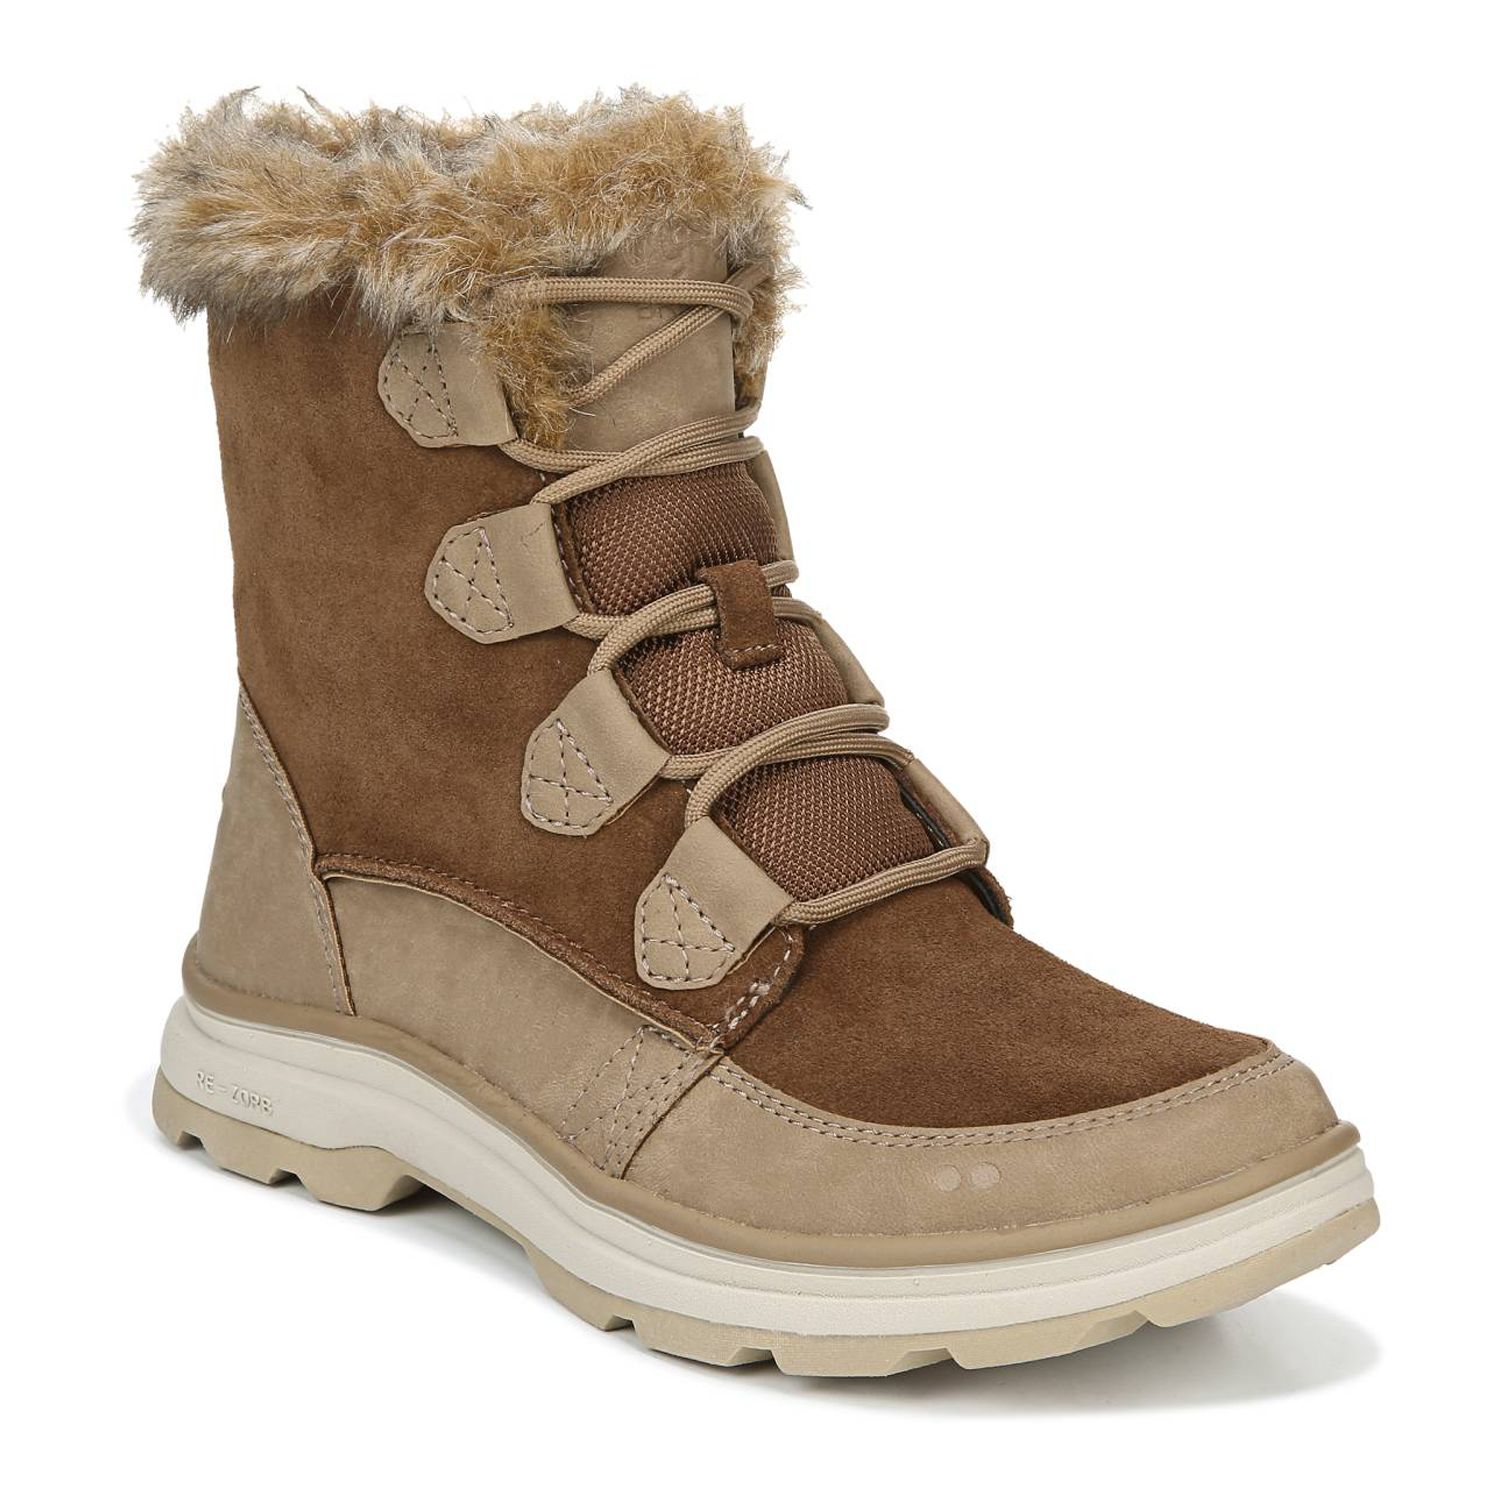 women's winter boots with spikes